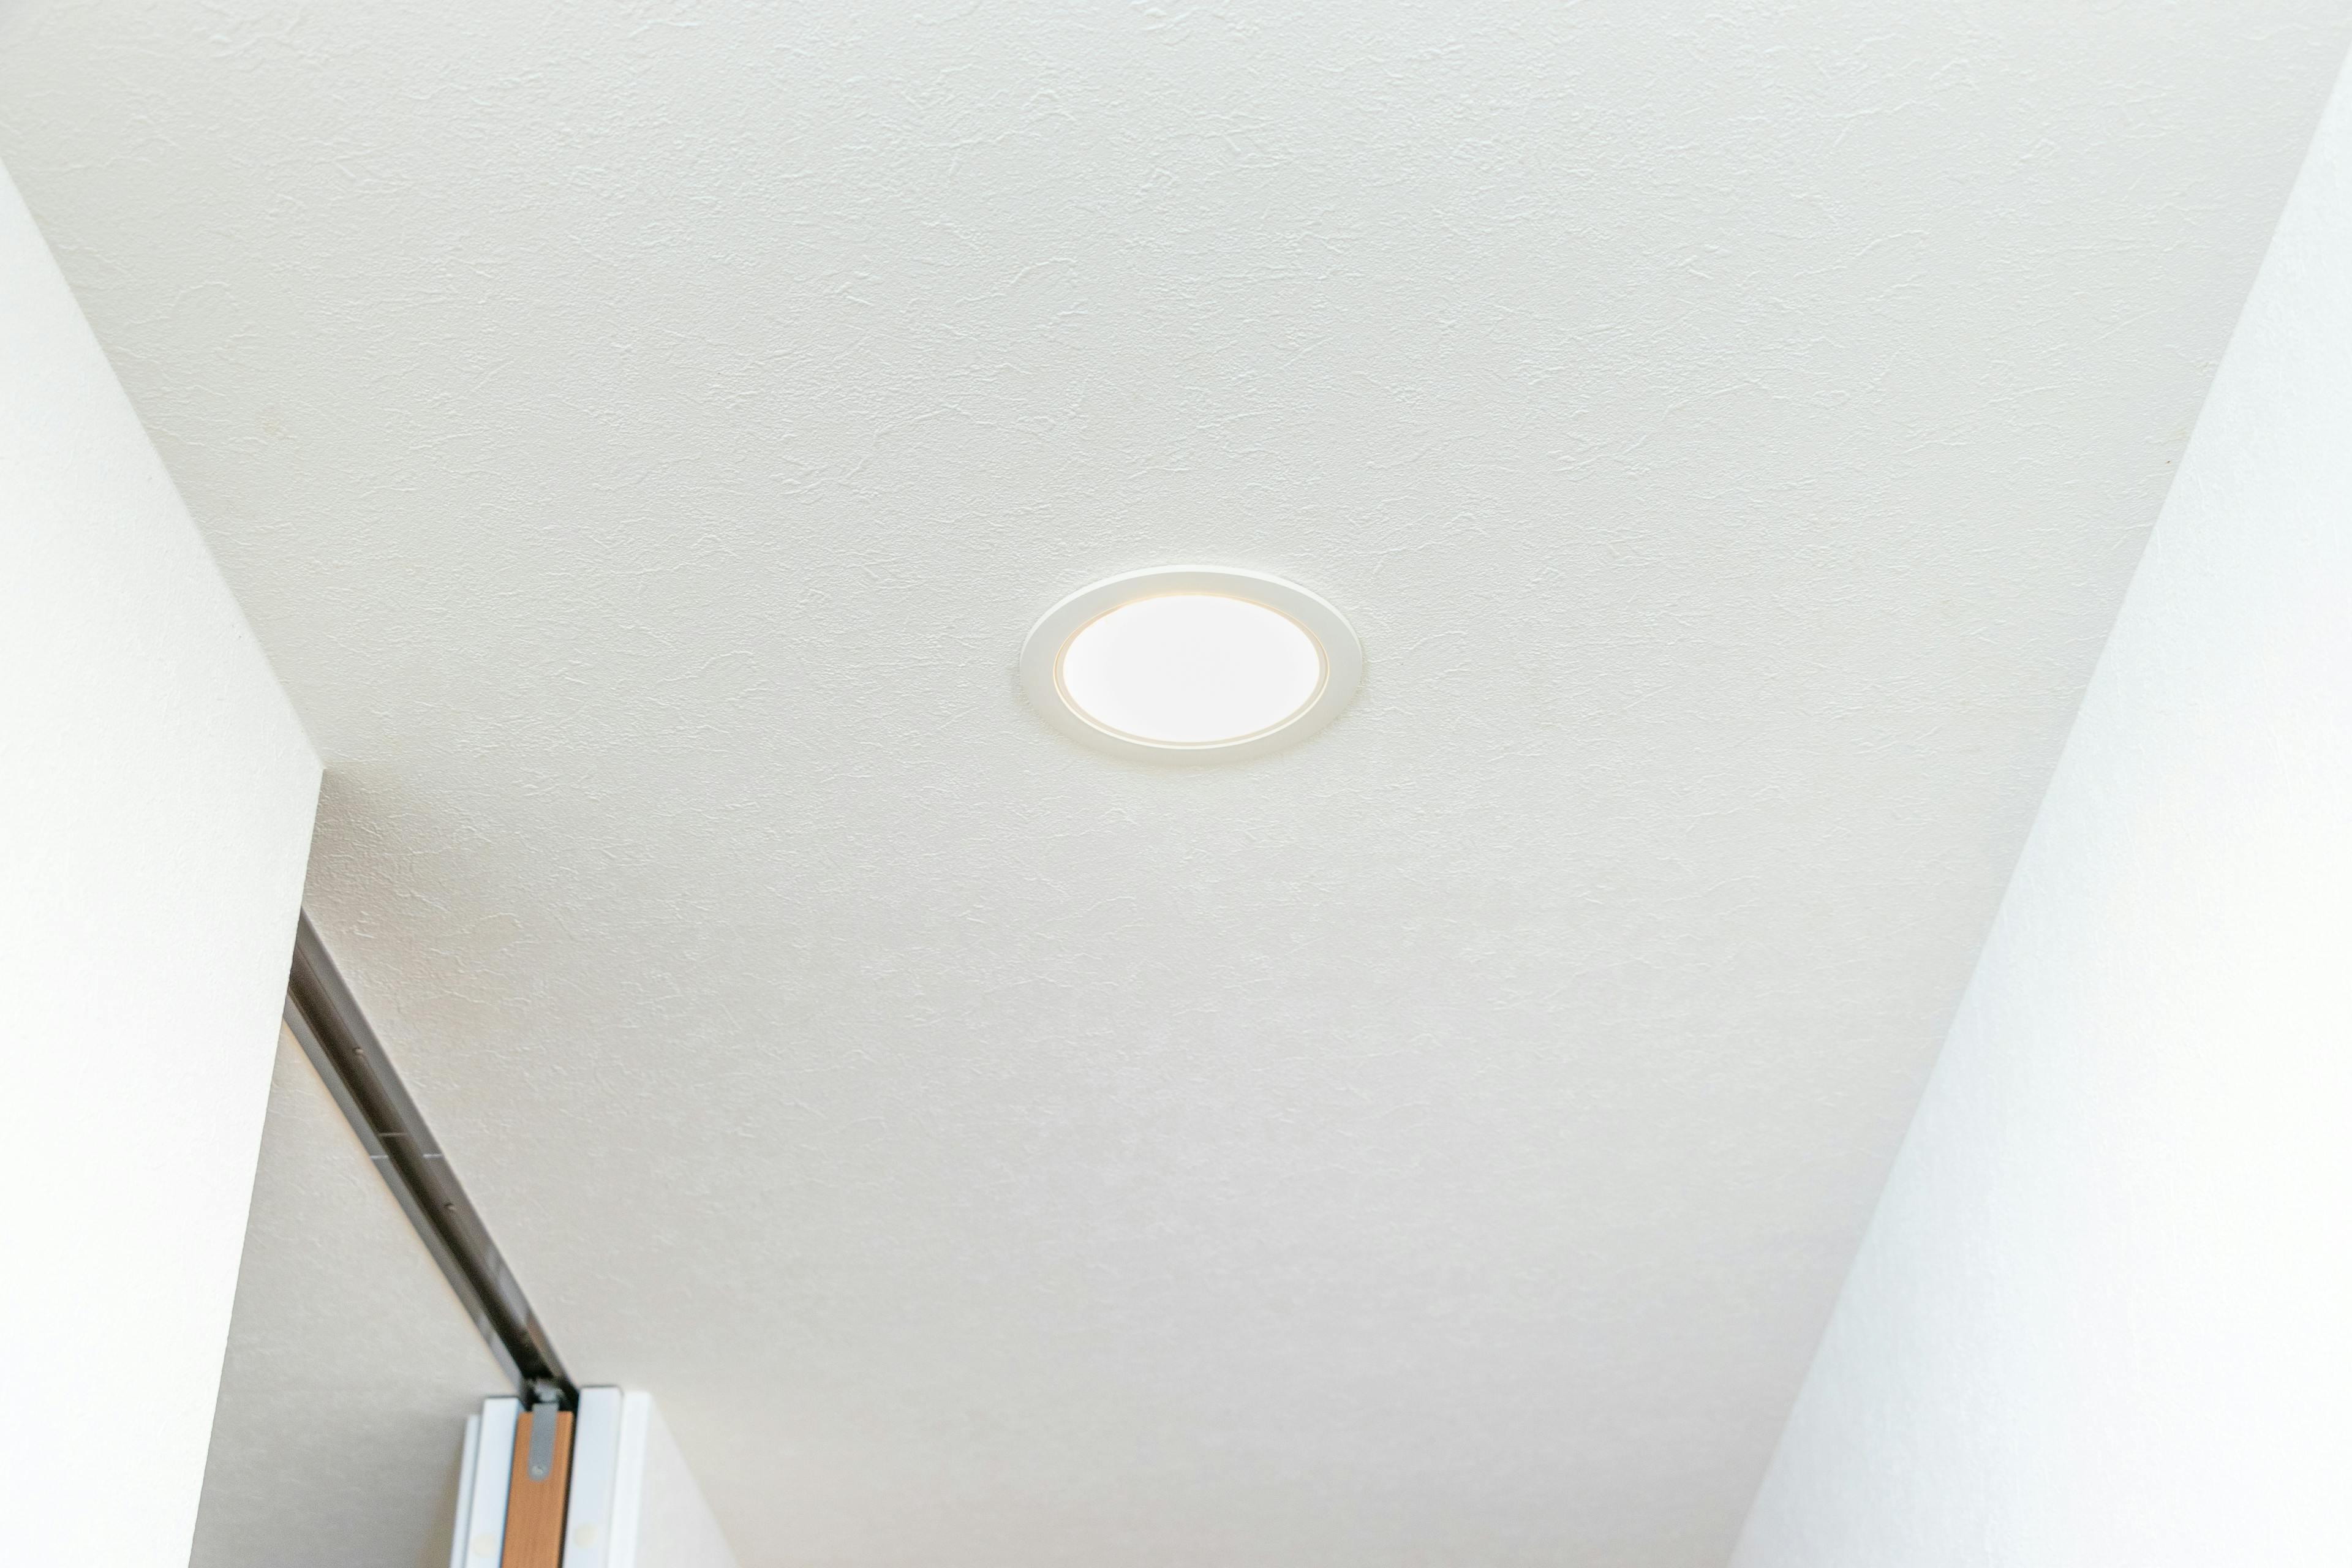 An image related to Recessed Lighting/Downlights